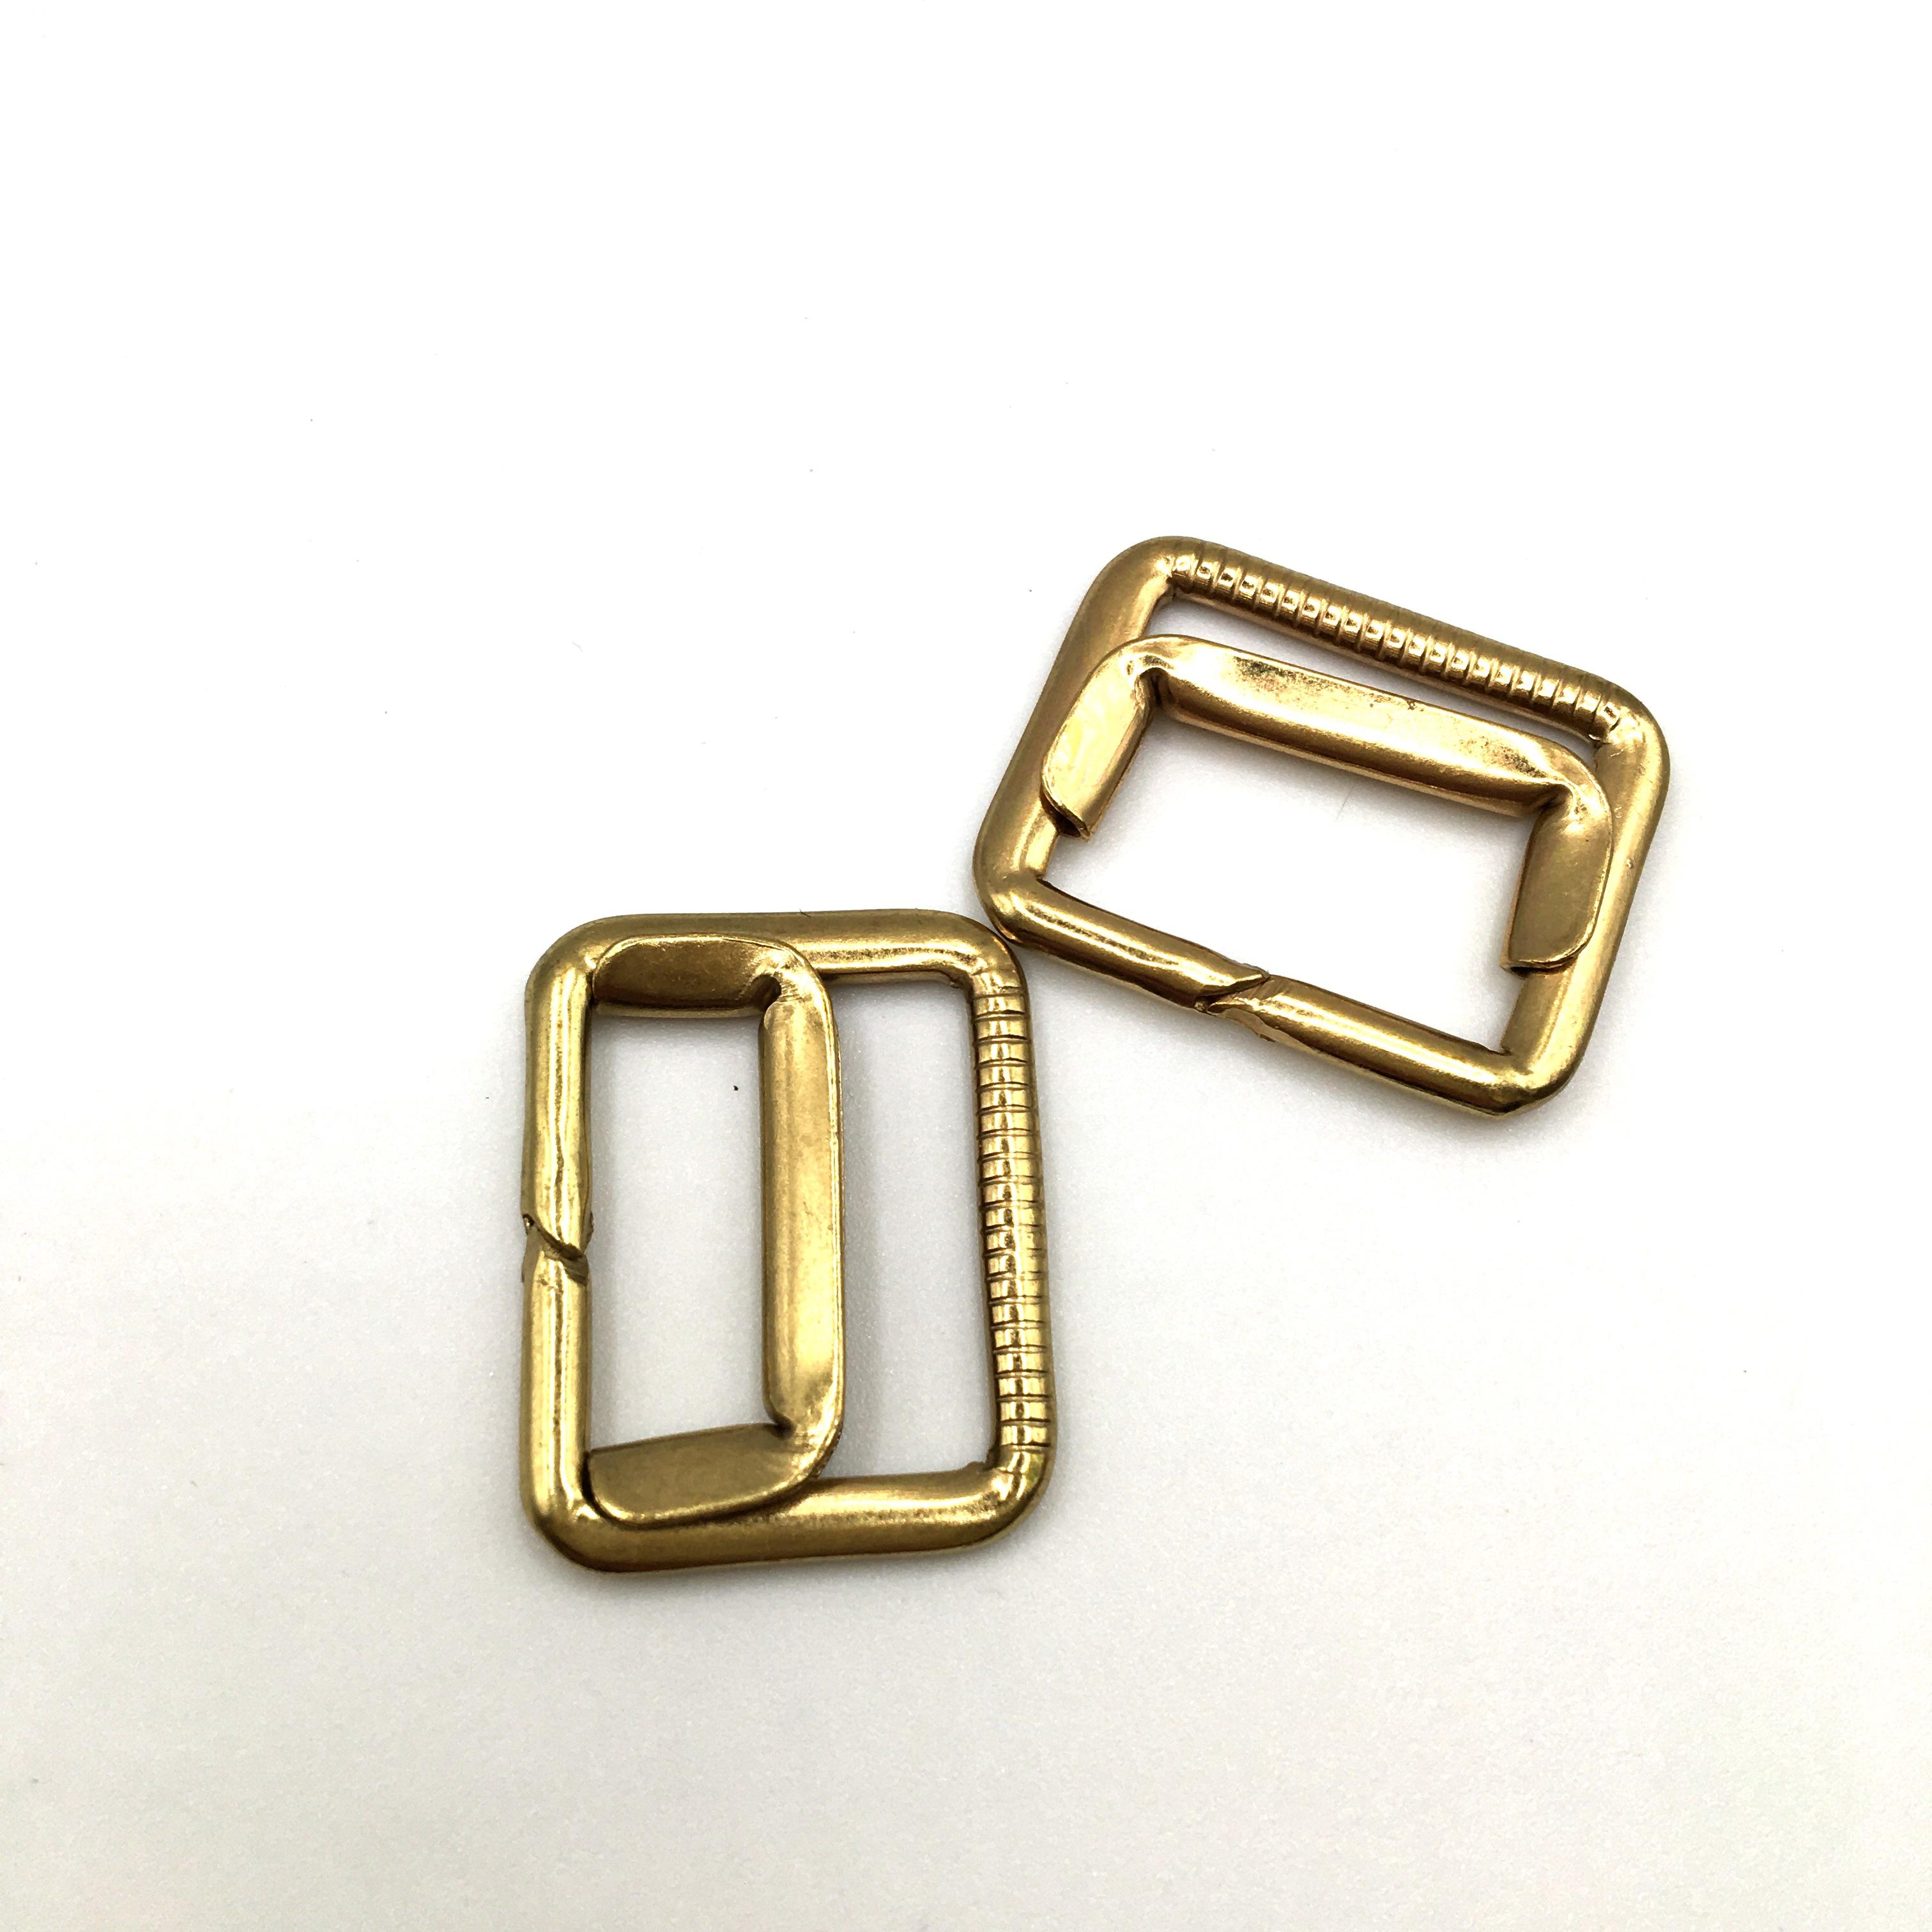 Buckle with sliding bar - Metal, 20mm internal (strap size) - Old GOLD ...